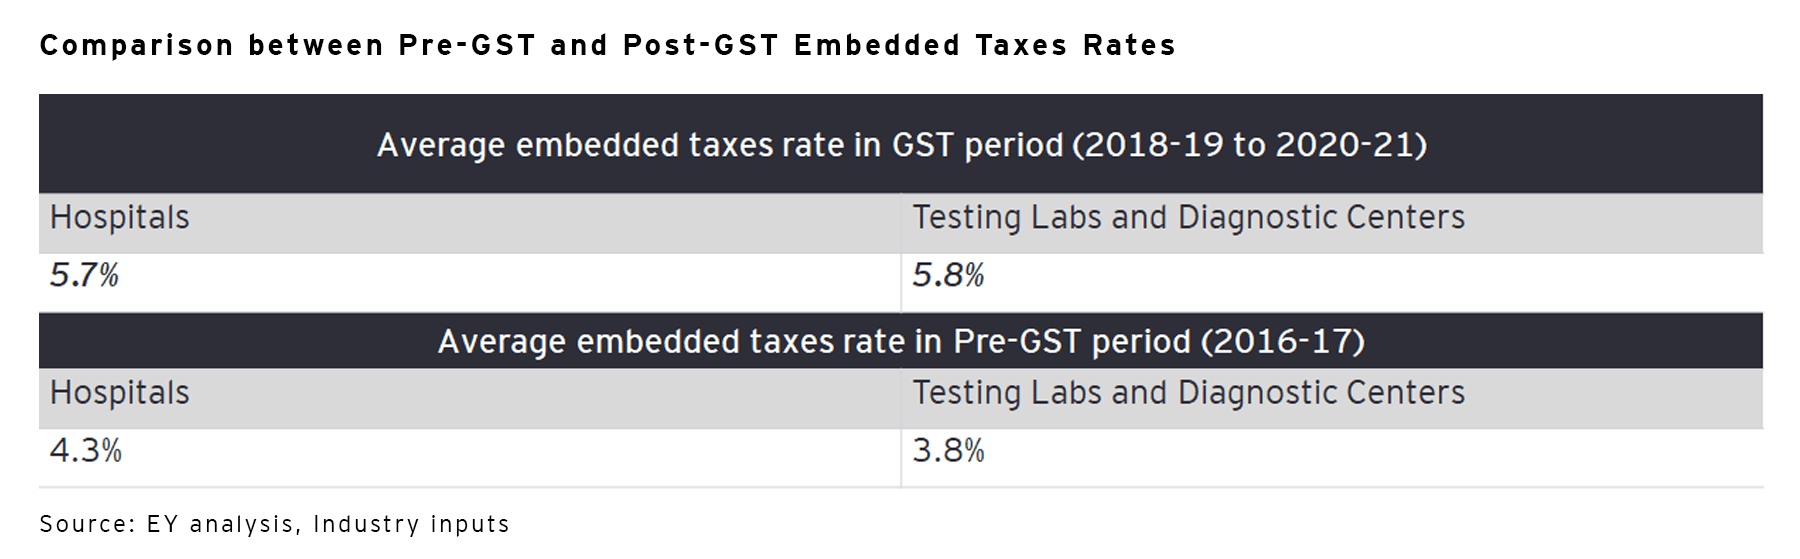 Comparison between Pre-GST and Post-GST embedded taxes rate 